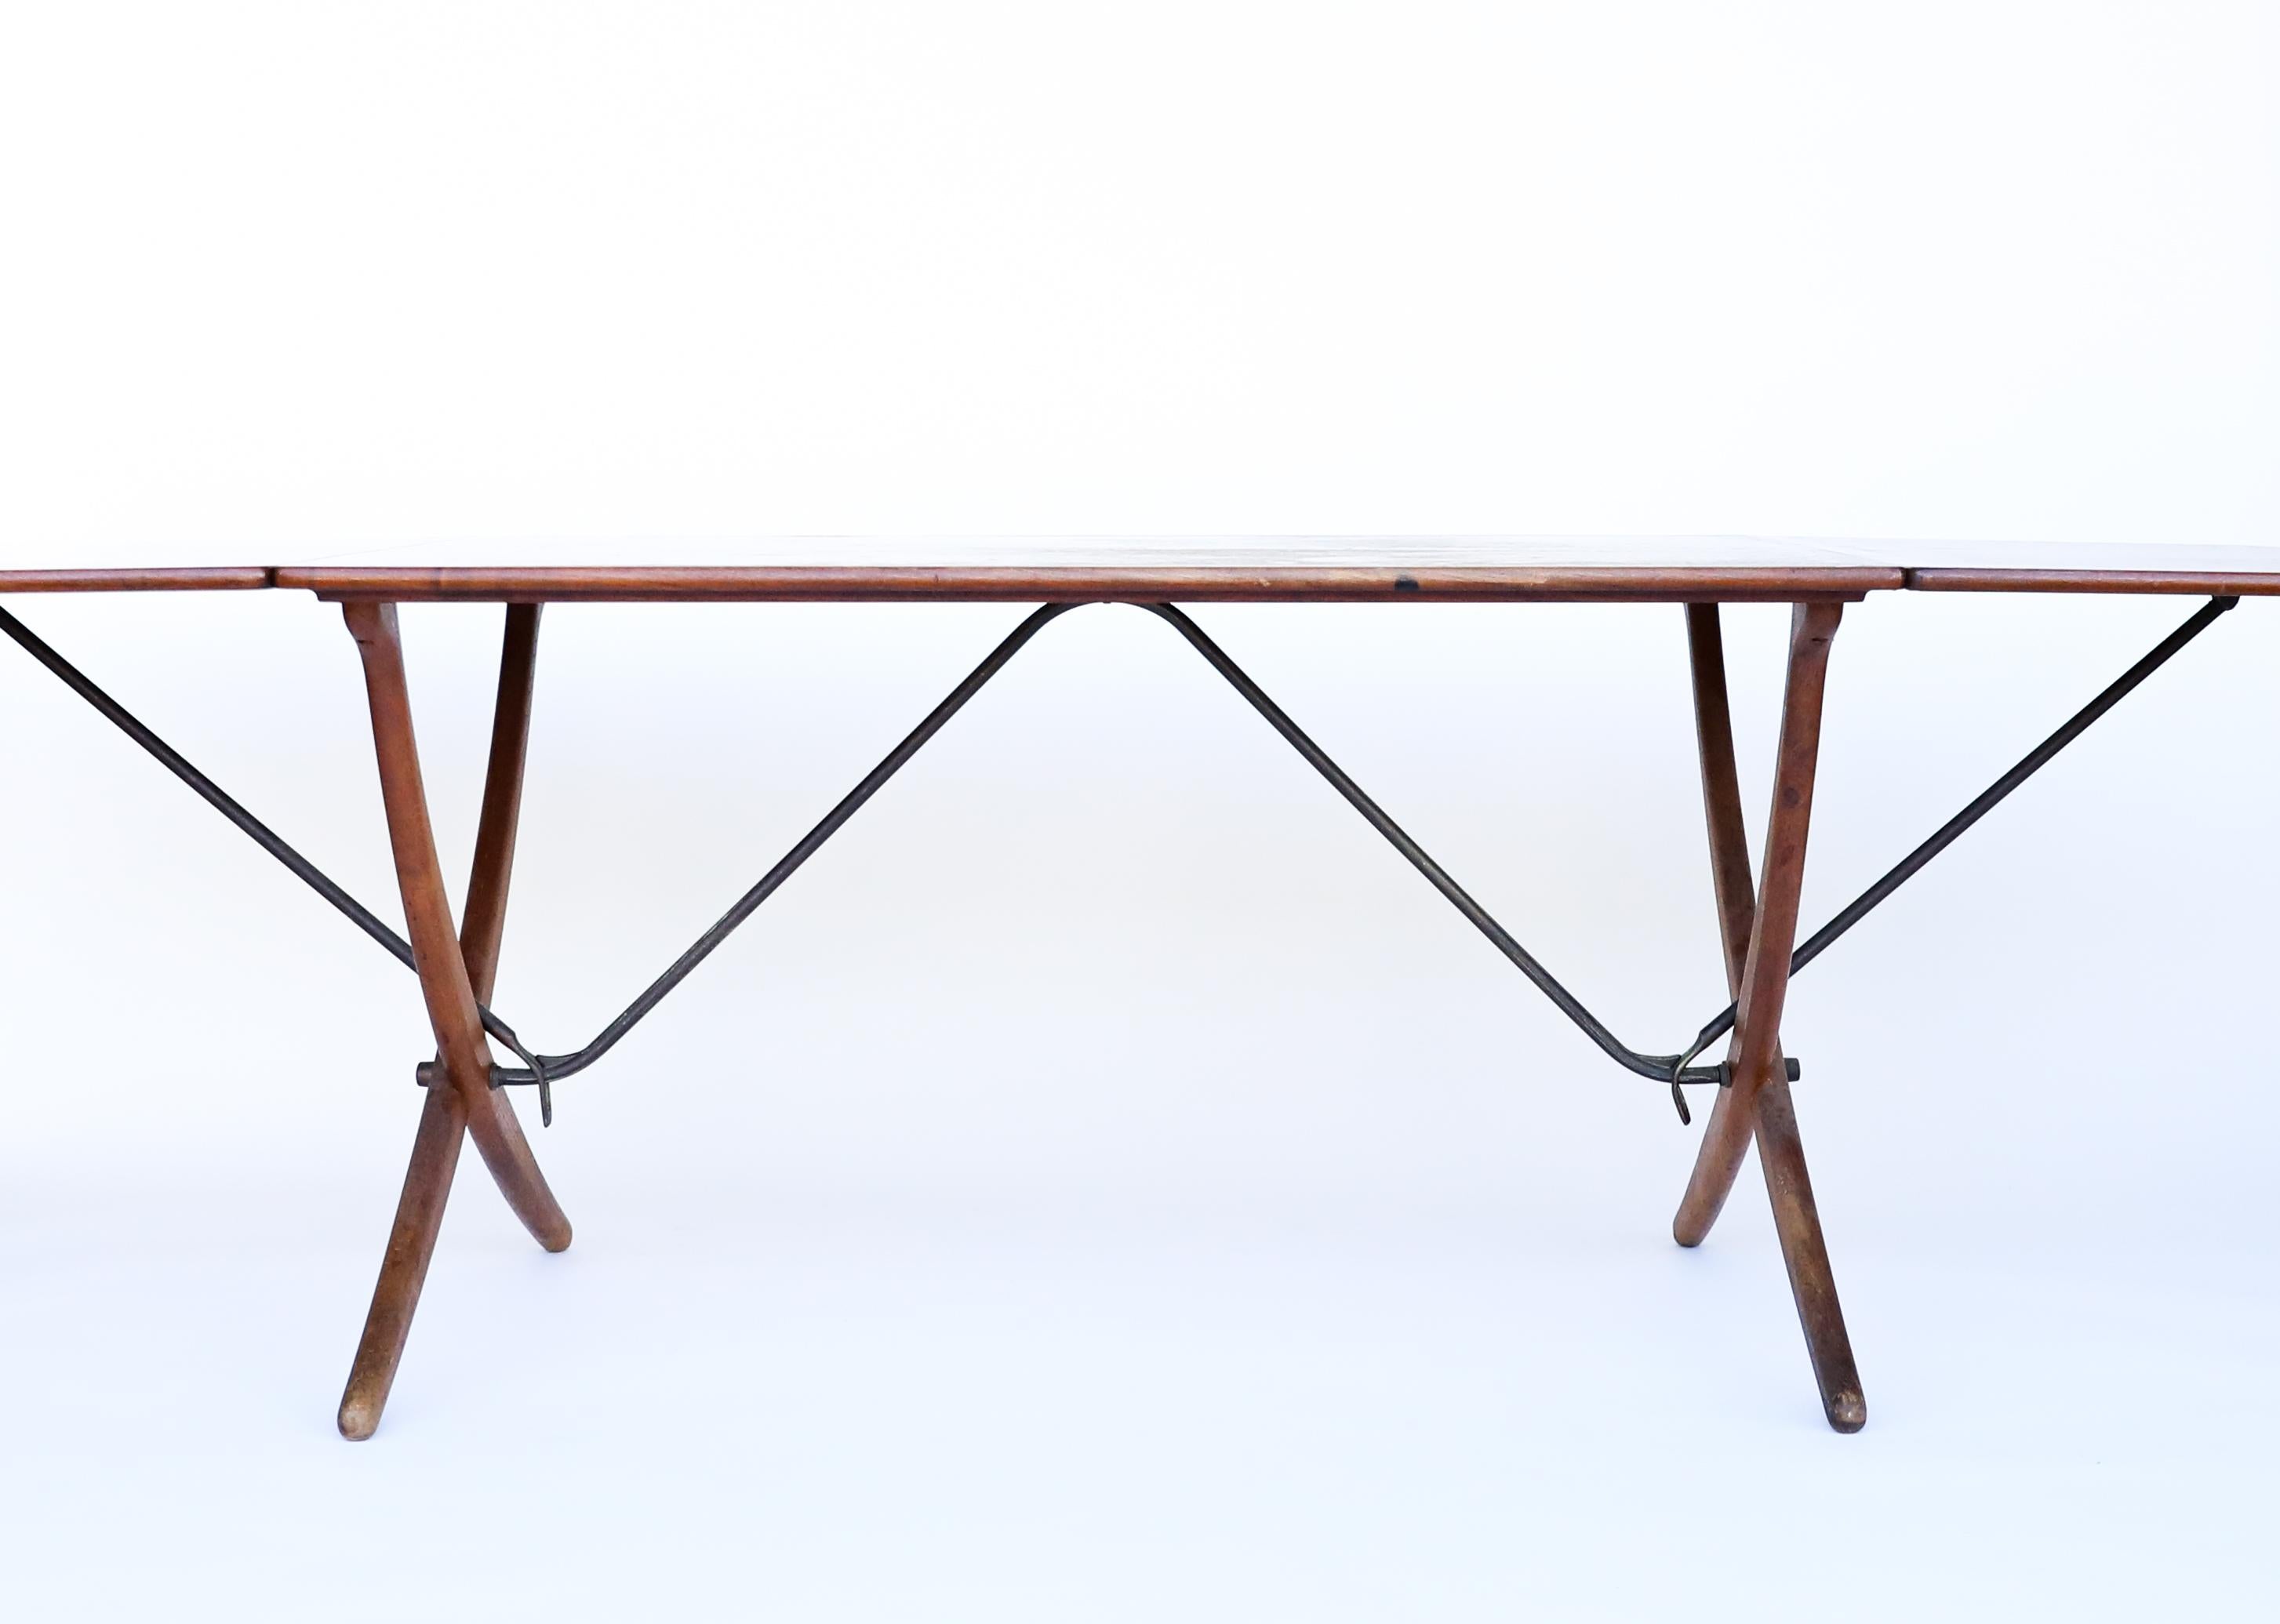 Hans J. Wegner dining table AT-304 with two drop-leaves, cross-legs, and stretchers of brass. Designed by Wegner in 1950's and manufactured by one of Denmark's finest cabinetmakers Andreas Tuck in Denmark. 

Dimensions: 93.50 L x 33.75 W x 28.25H